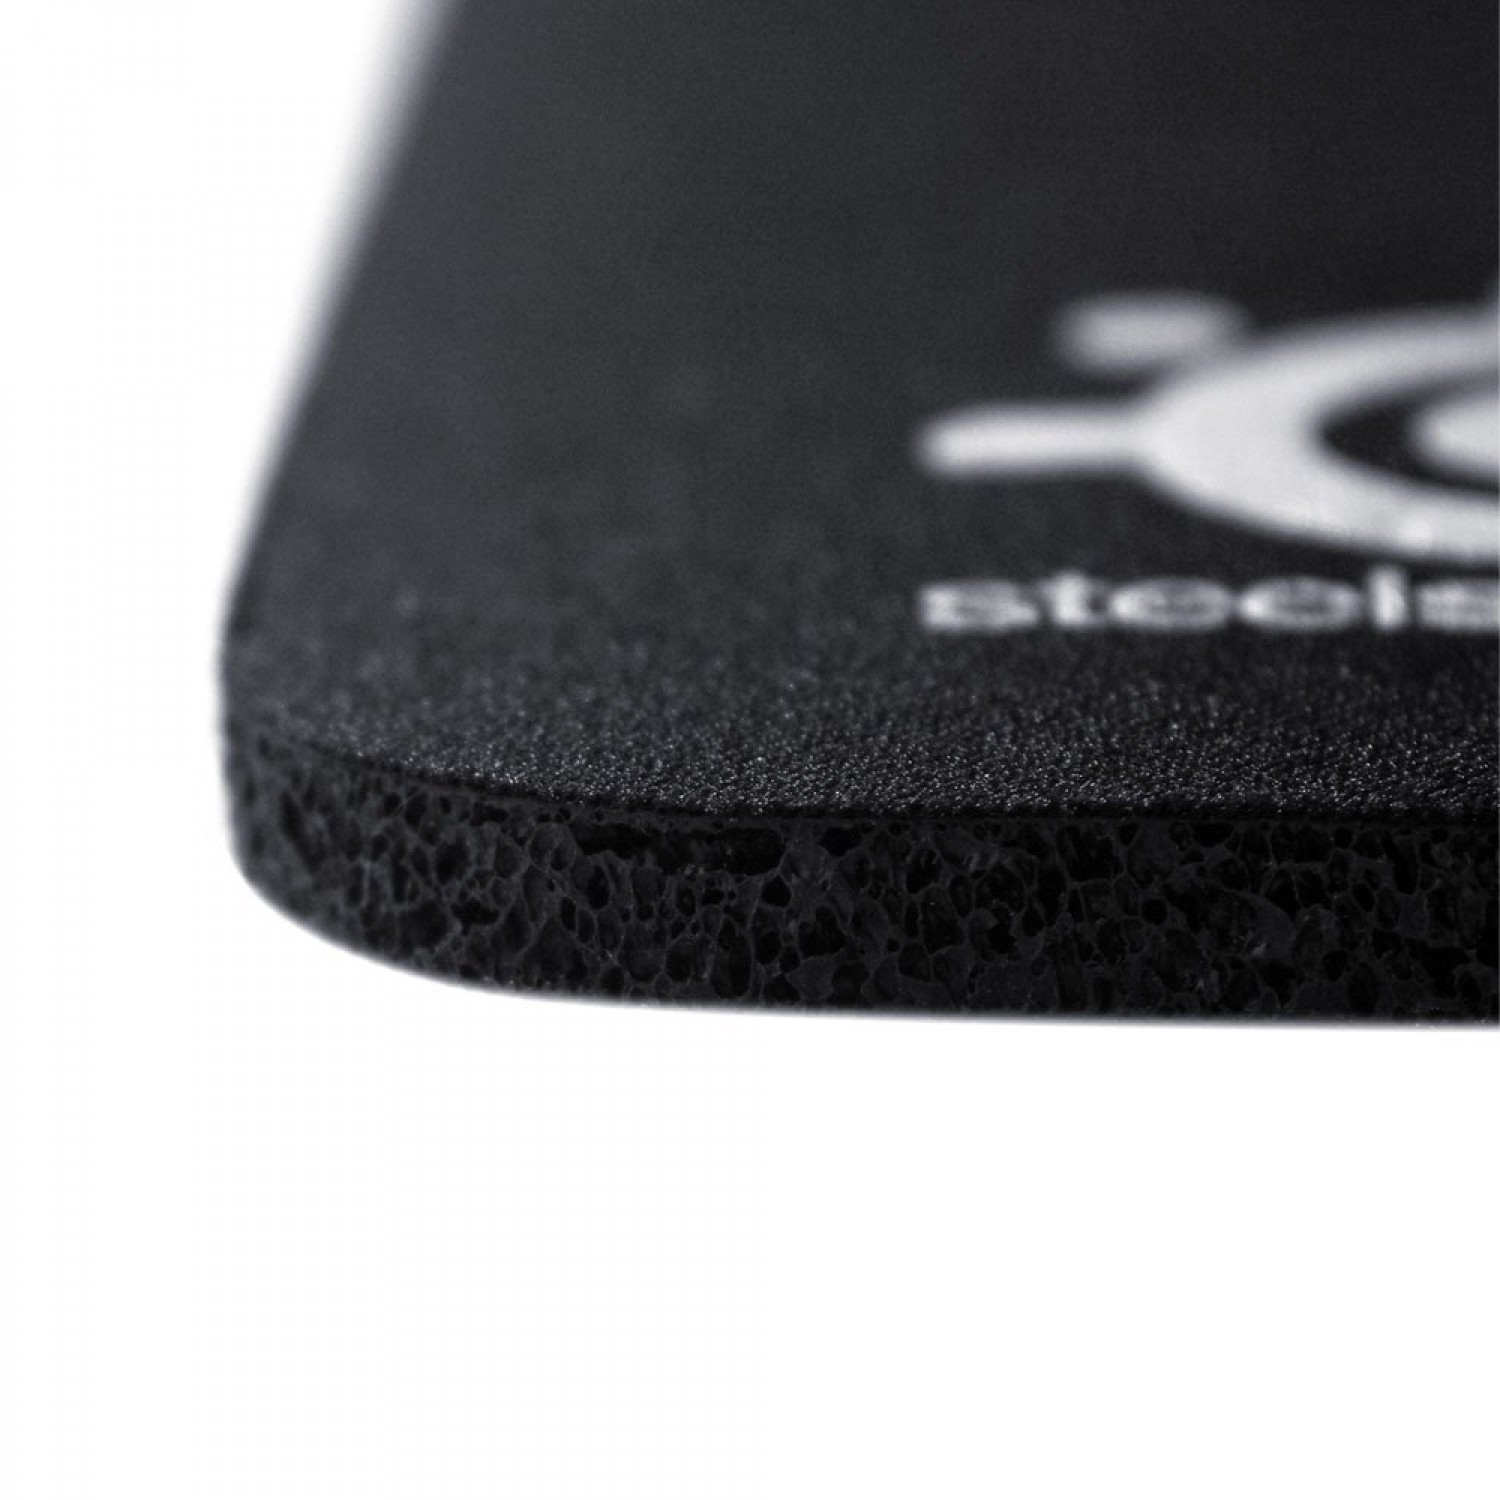 Steelseries Qck Heavy Mouse pad-3